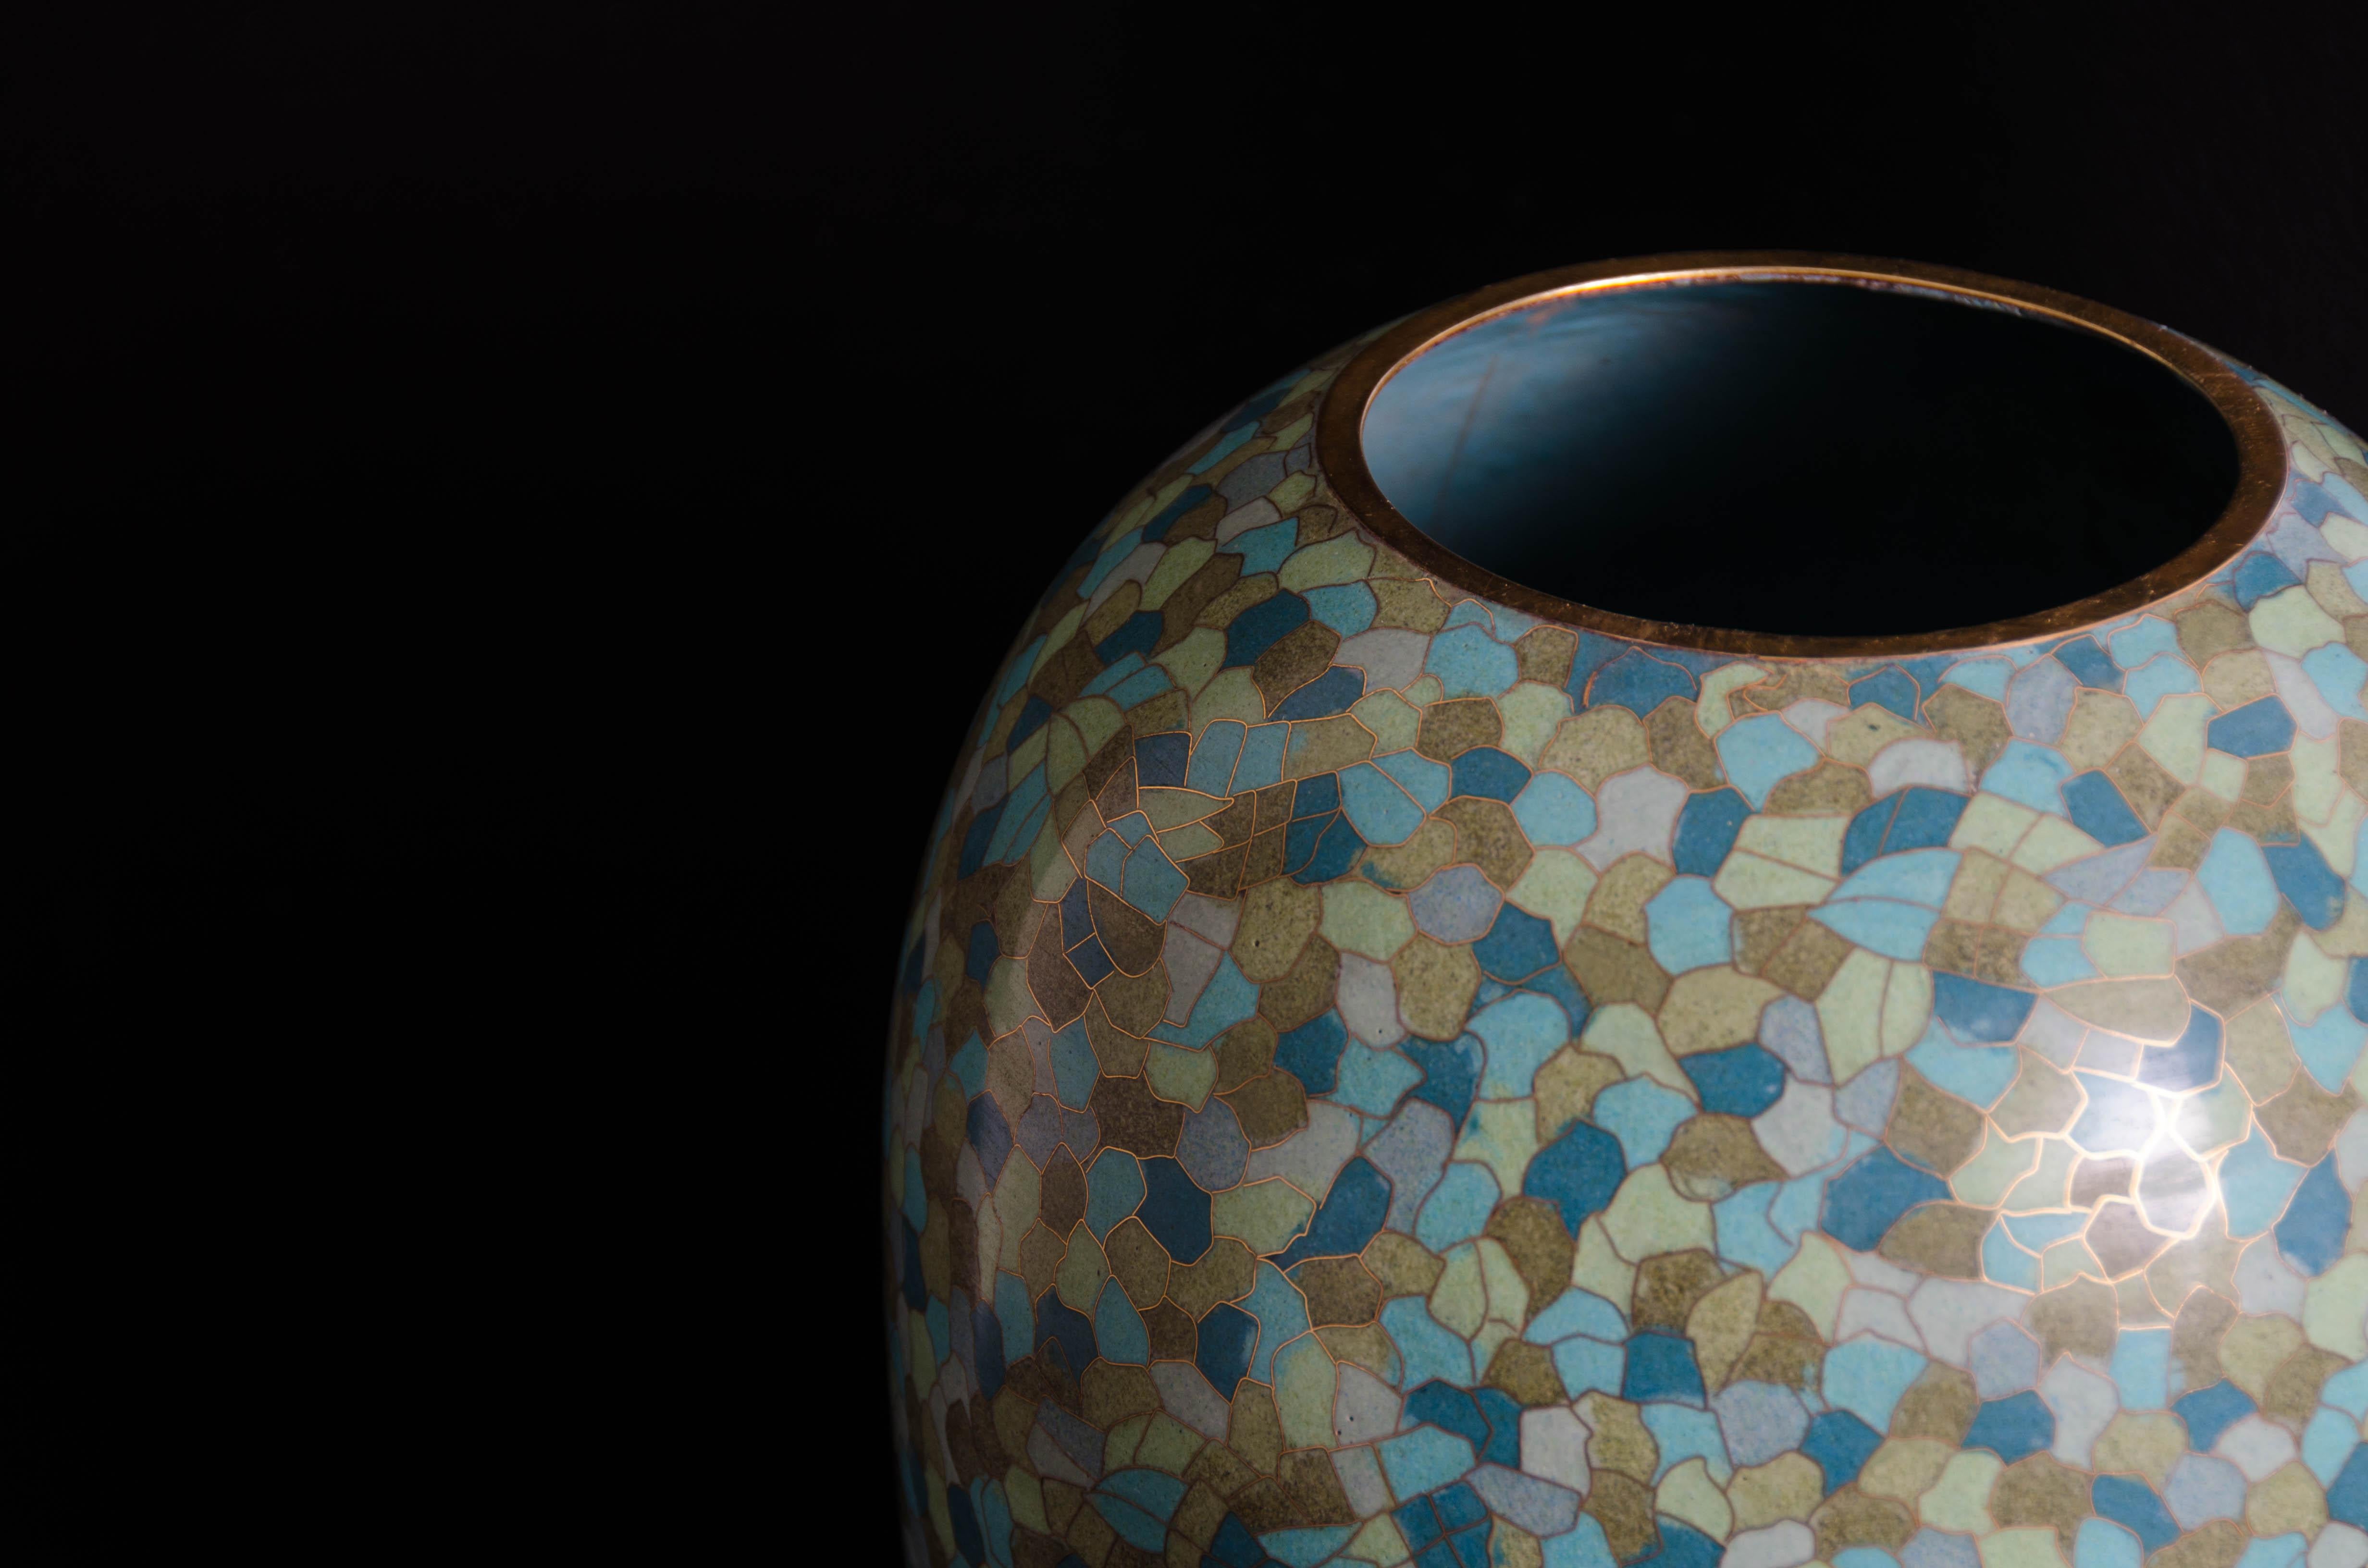 Cloissoné Baluster Jar and Lid in Azure Colors by Robert Kuo, Limited Edition For Sale